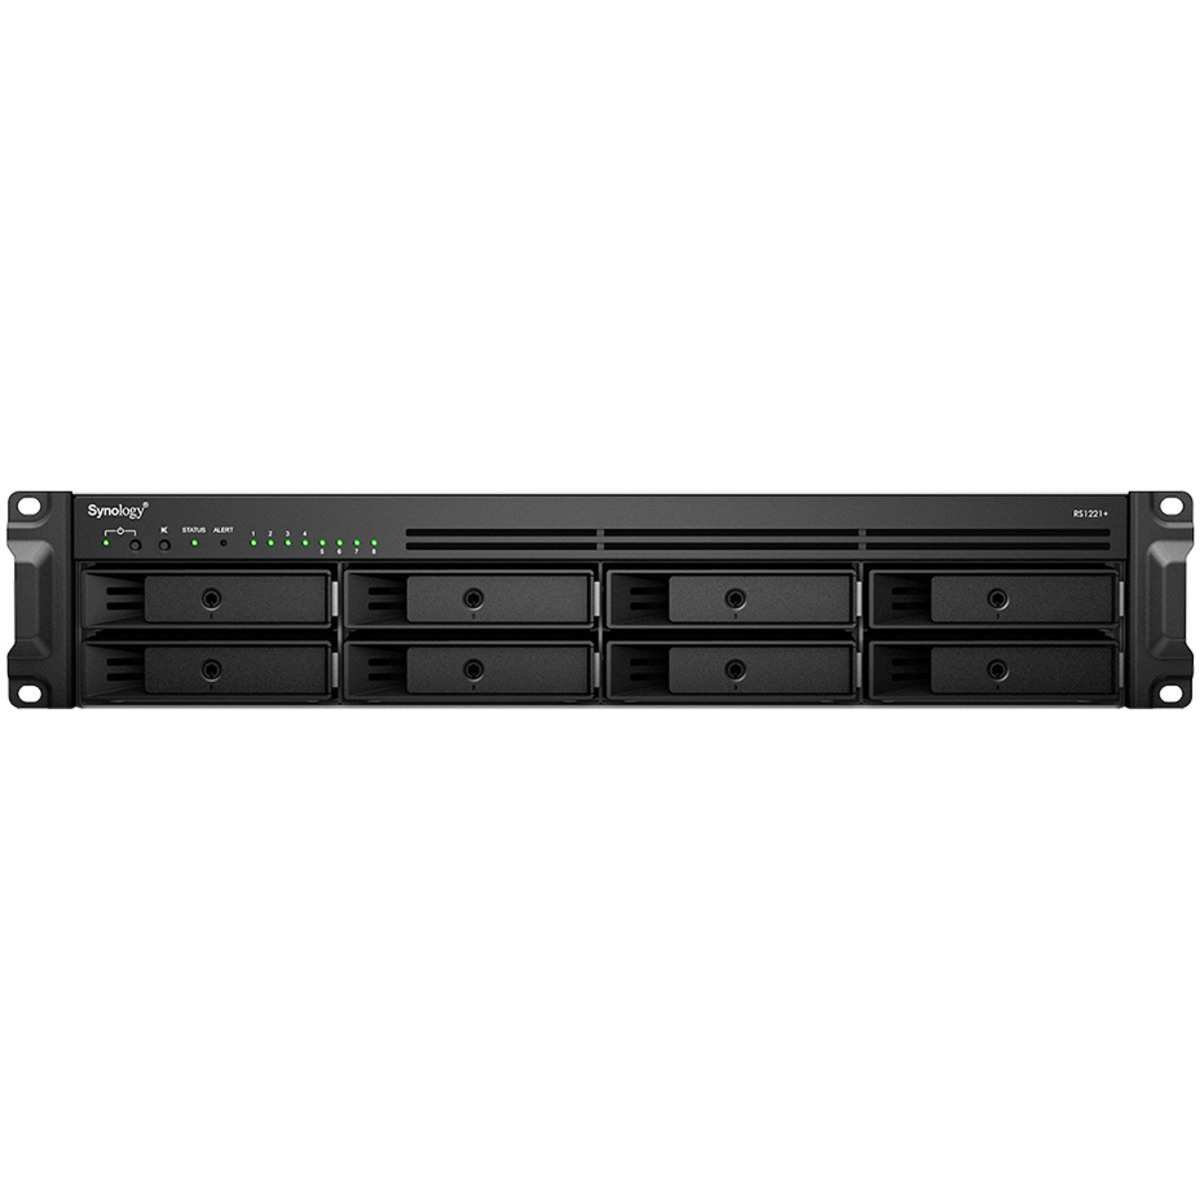 Synology RackStation RS1221+ 30tb 8-Bay RackMount Multimedia / Power User / Business NAS - Network Attached Storage Device 5x6tb Seagate BarraCuda ST6000DM003 3.5 5400rpm SATA 6Gb/s HDD CONSUMER Class Drives Installed - Burn-In Tested RackStation RS1221+